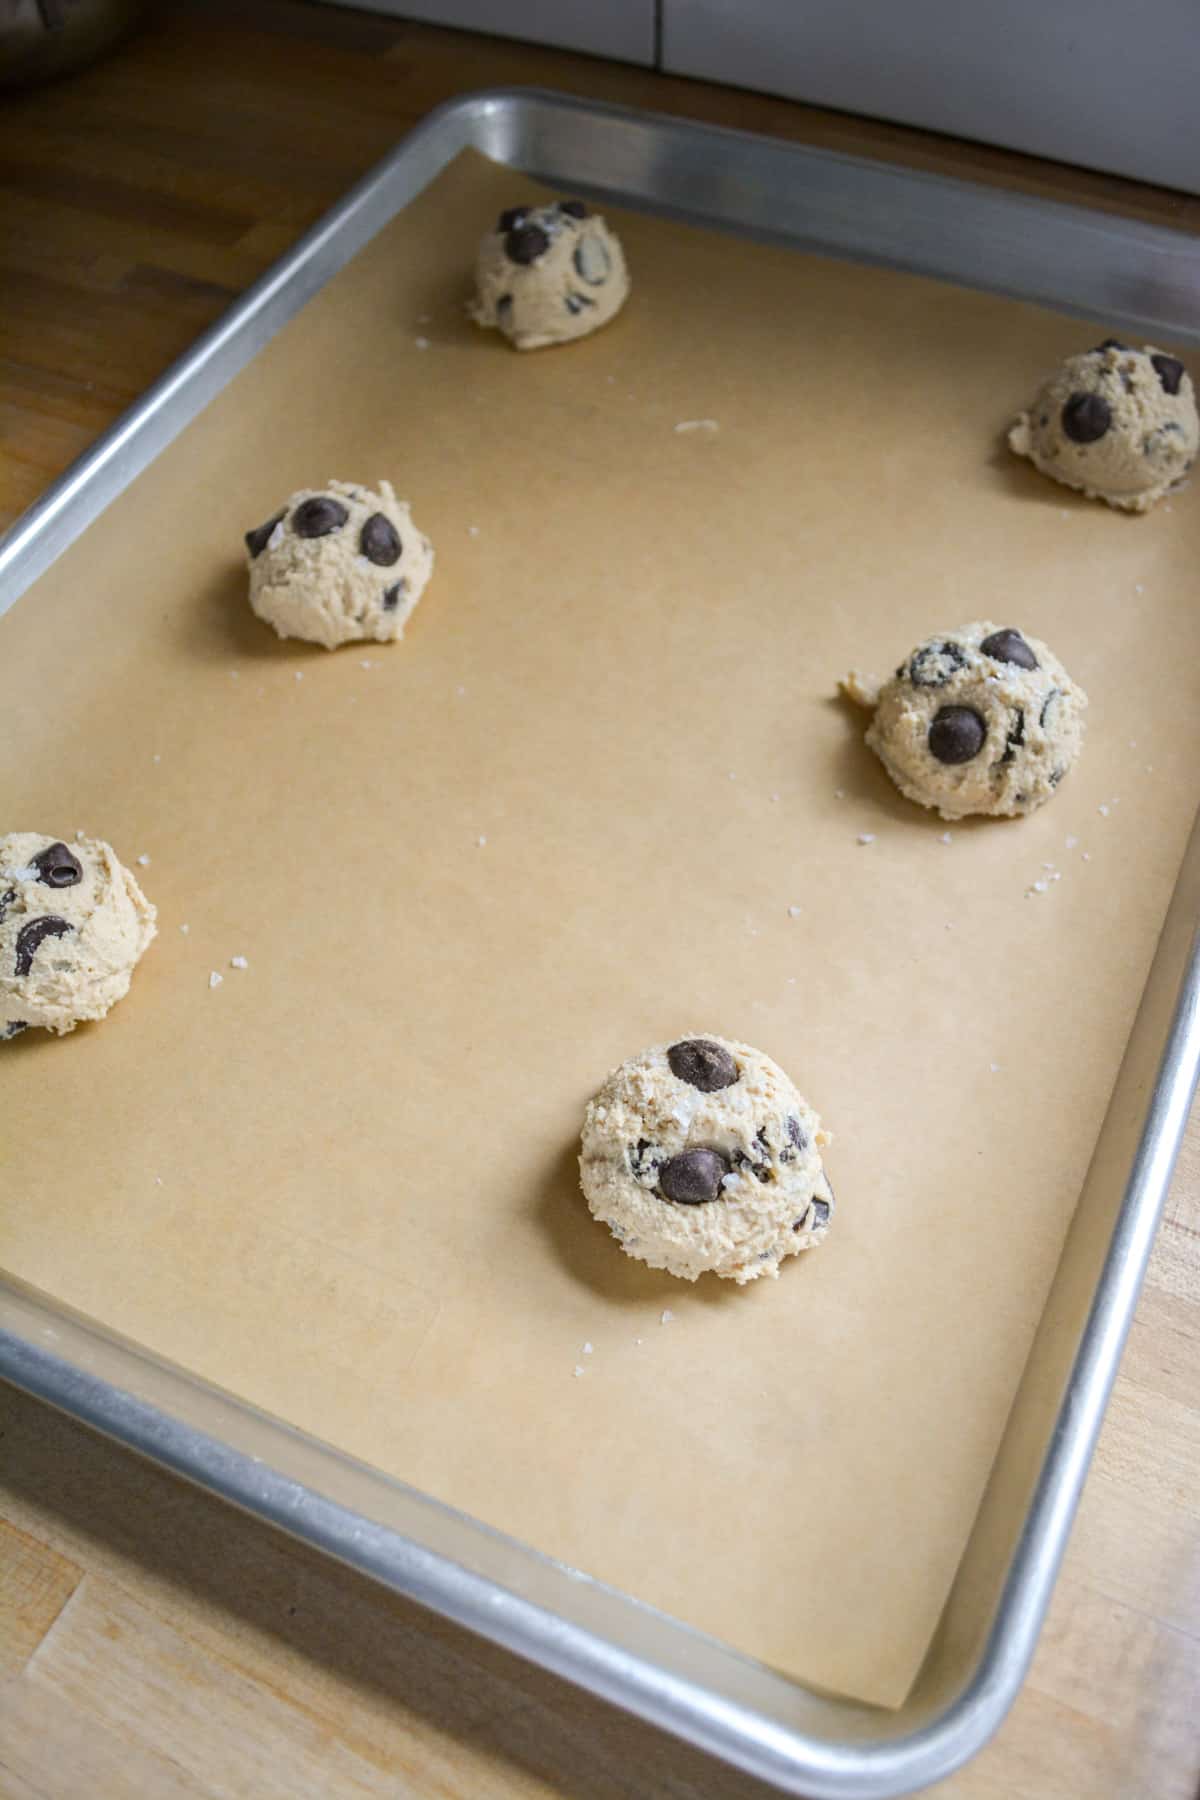 Cookie dough balls scooped onto a parchment-lined baking sheet.